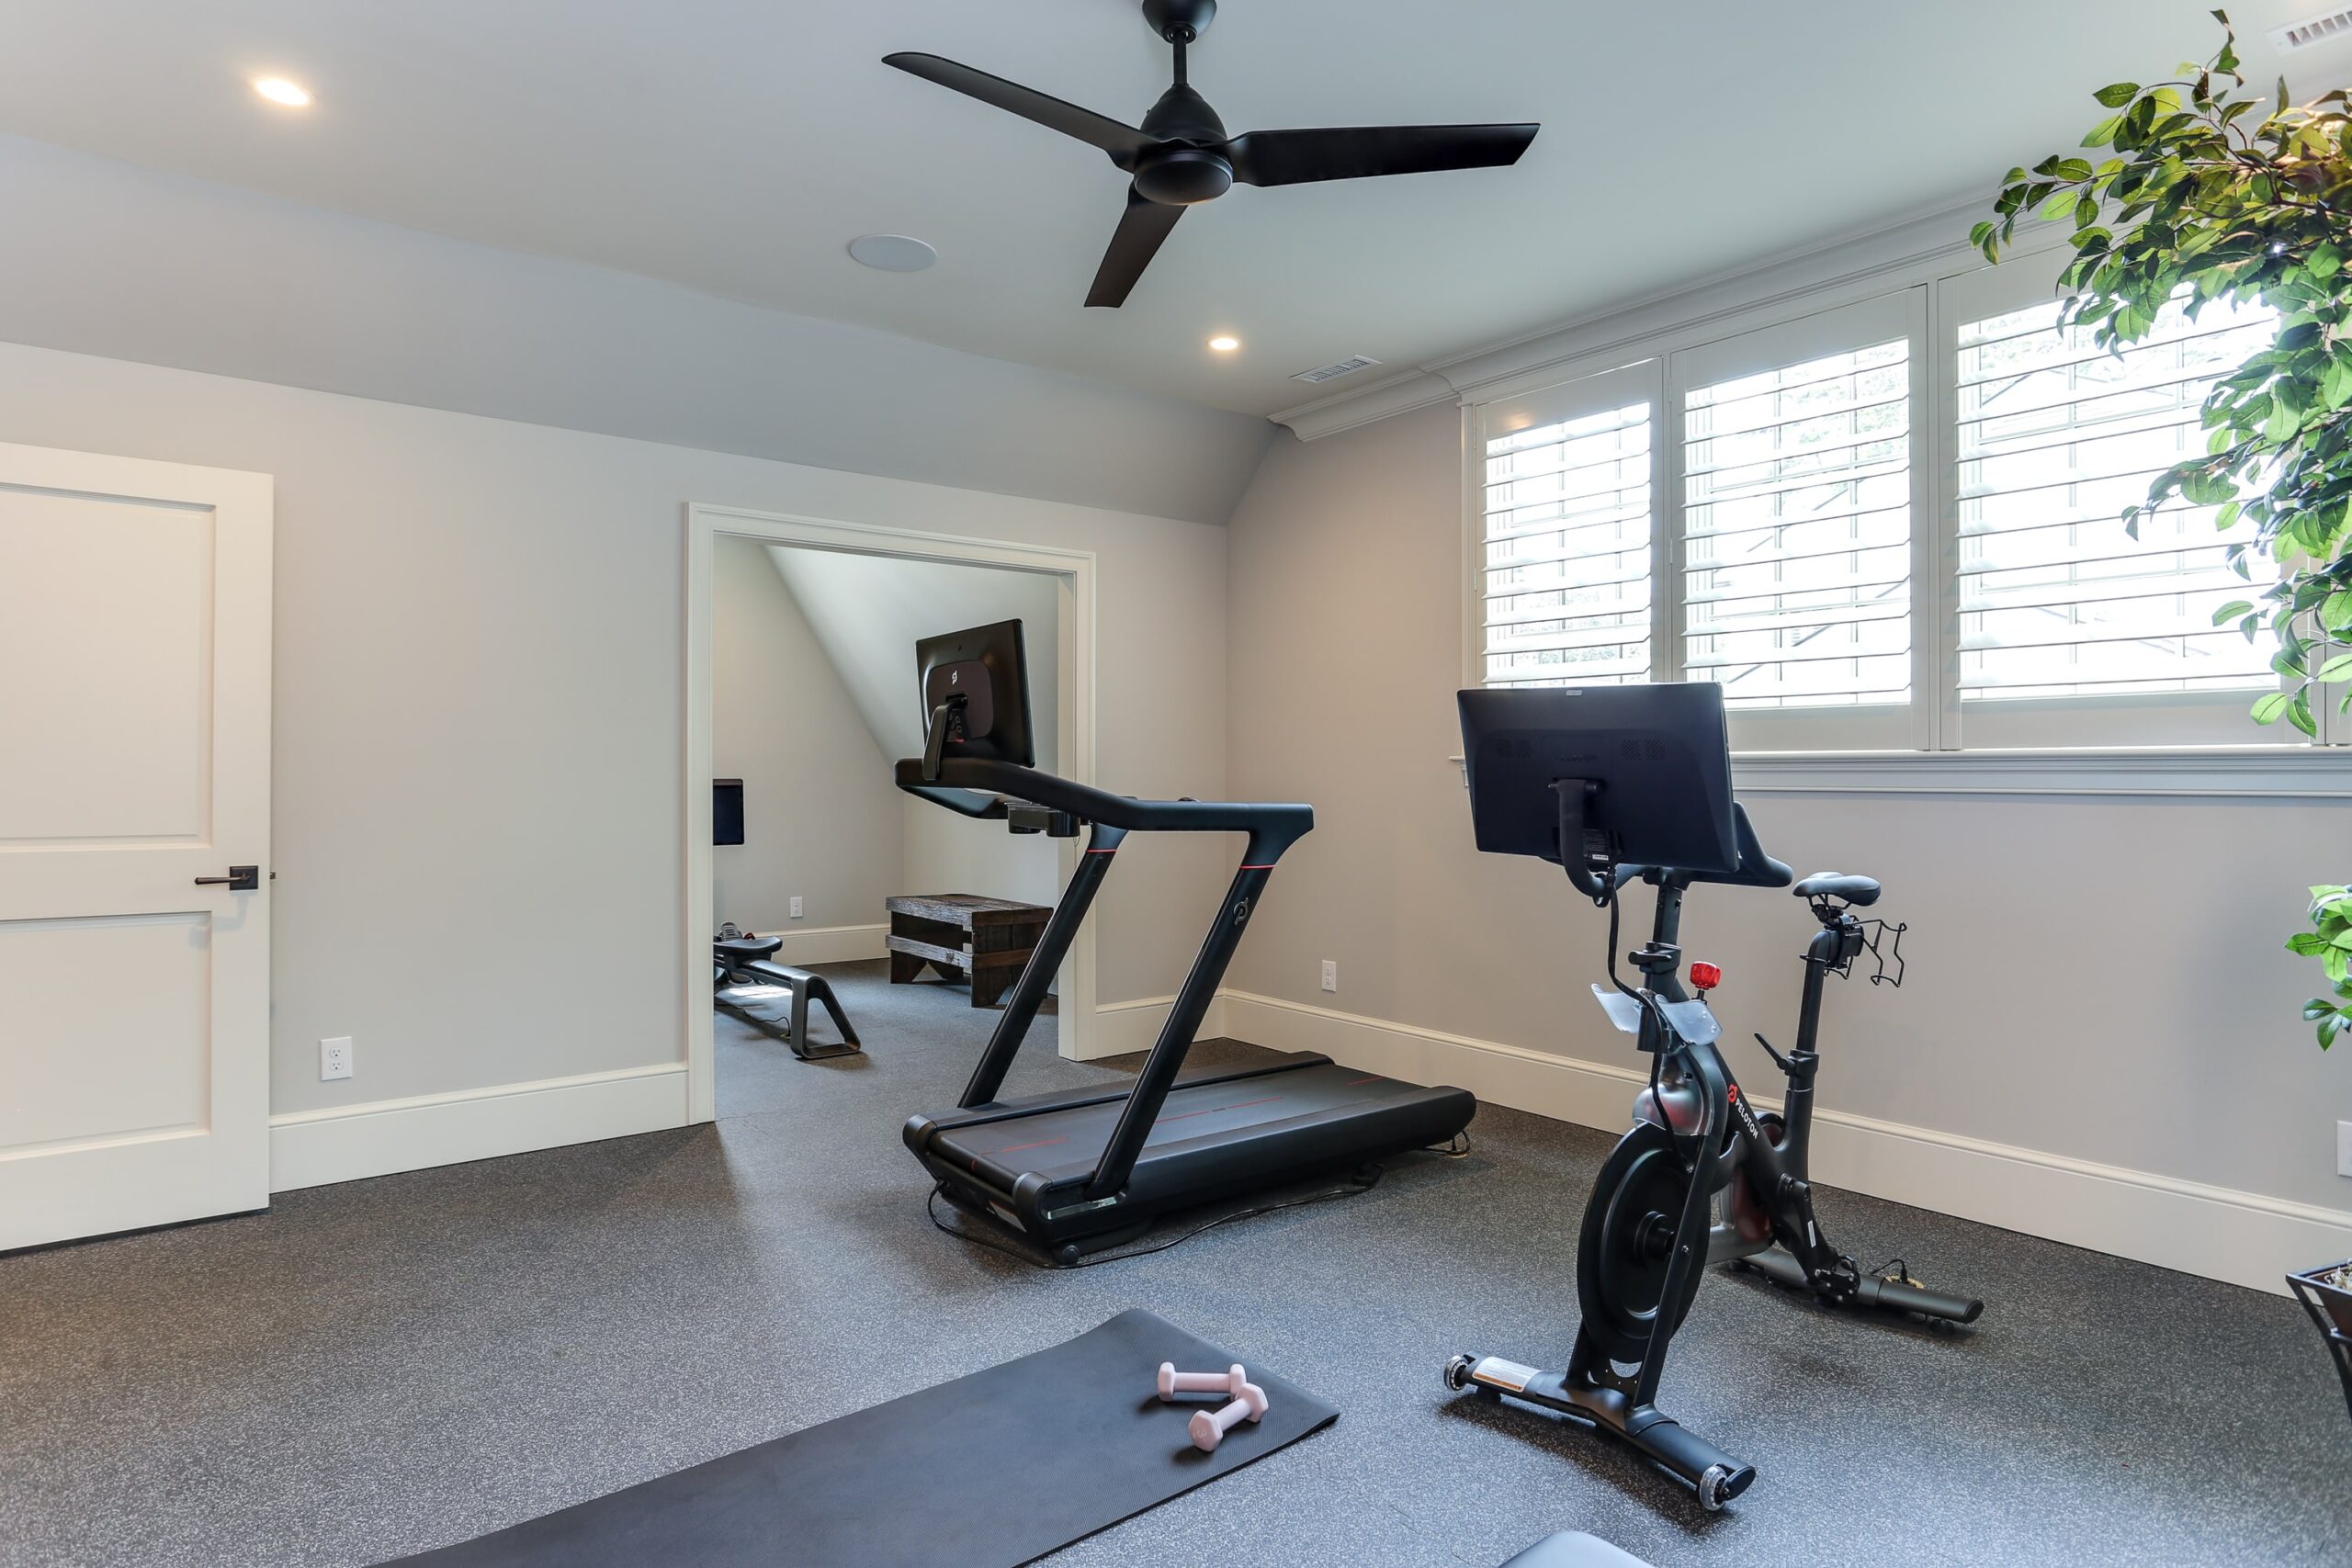 workout room in a house